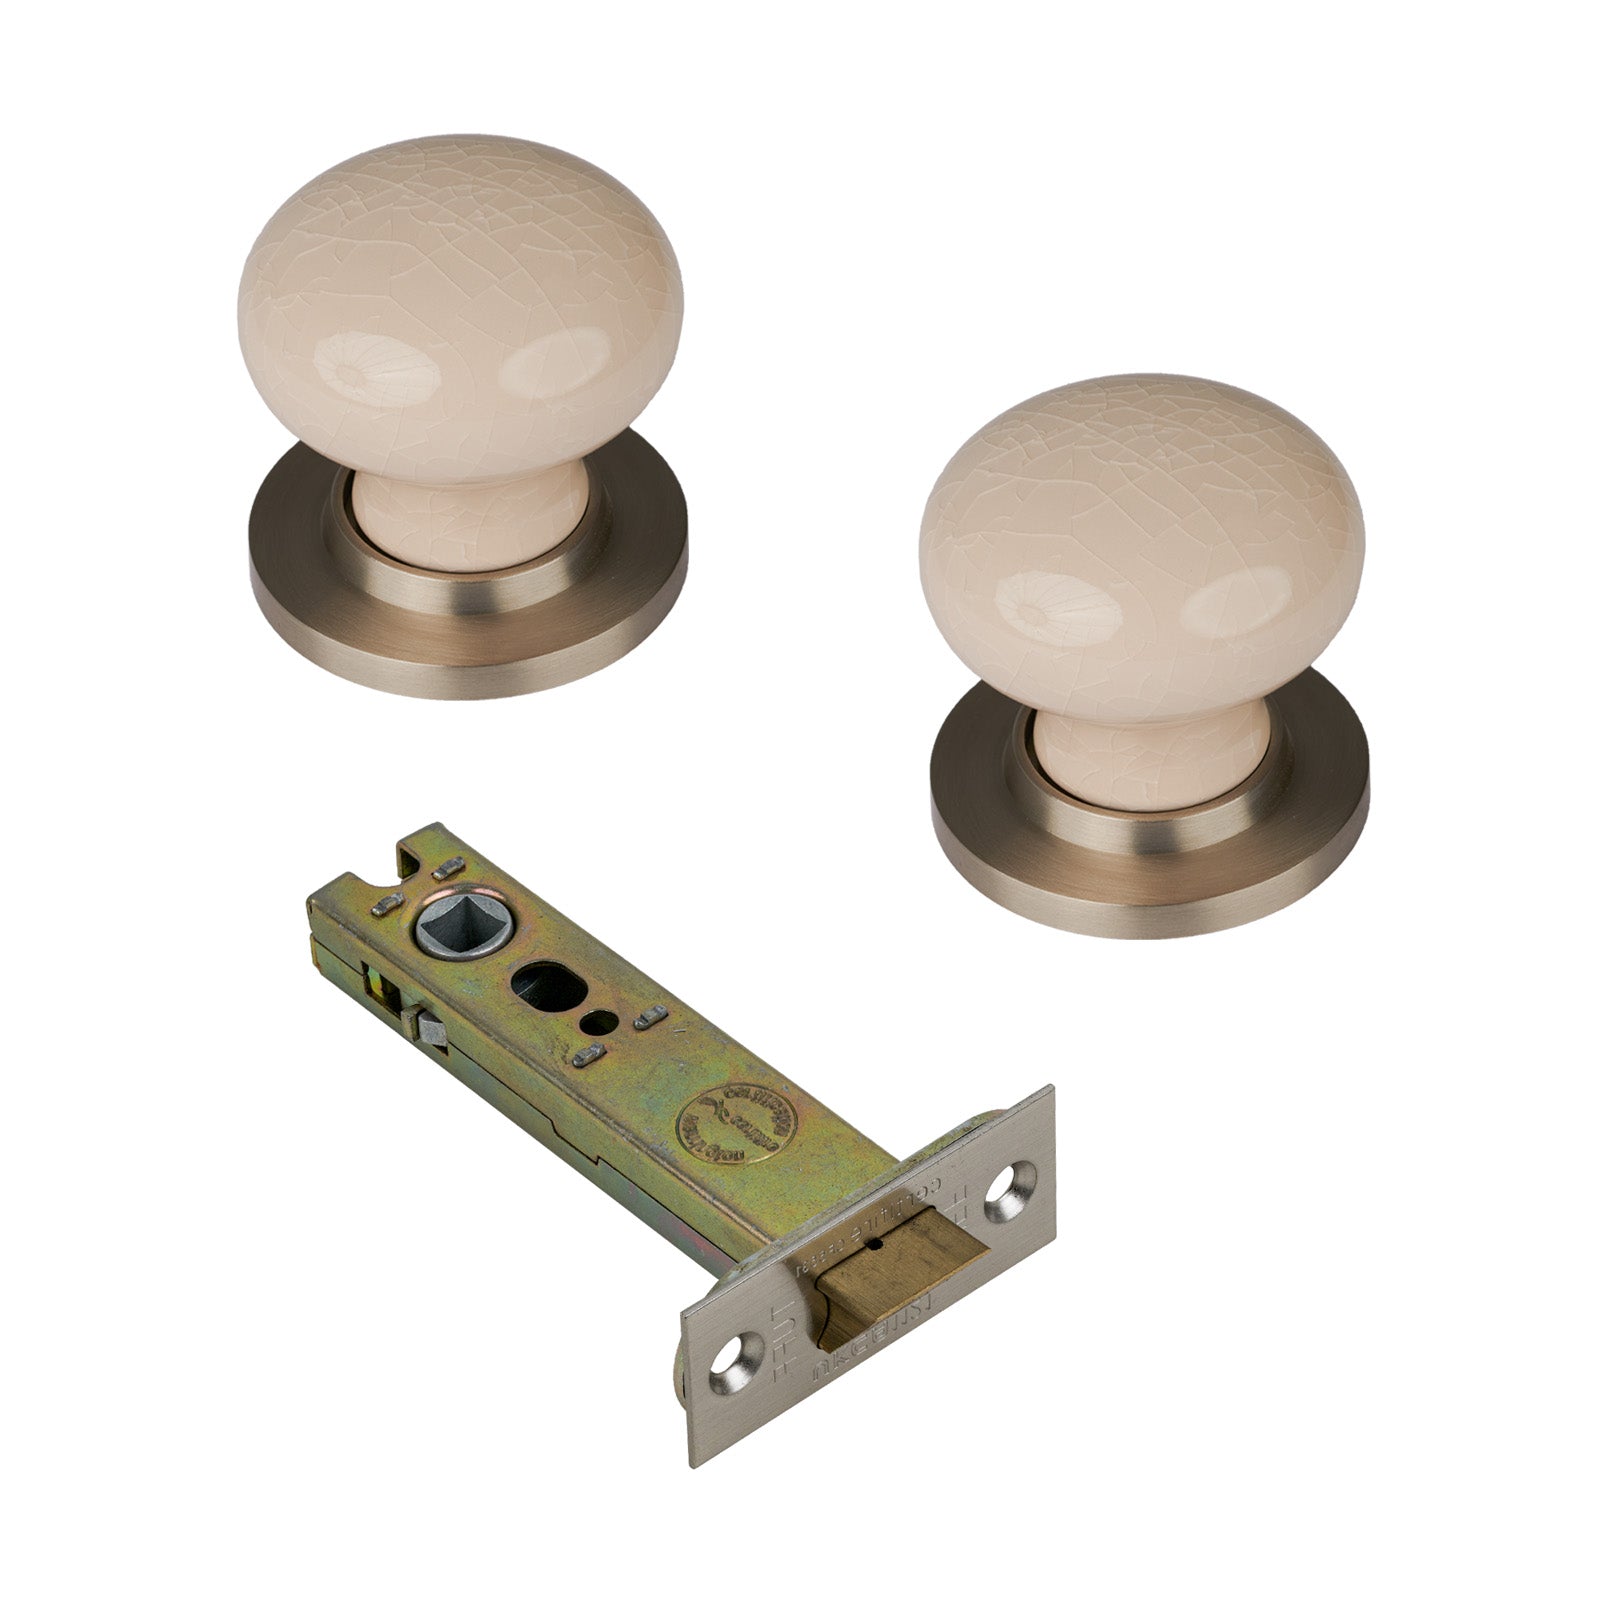 SHOW Cream Crackle Porcelain Door Knob with Satin Nickel Rose with 3 inch latch